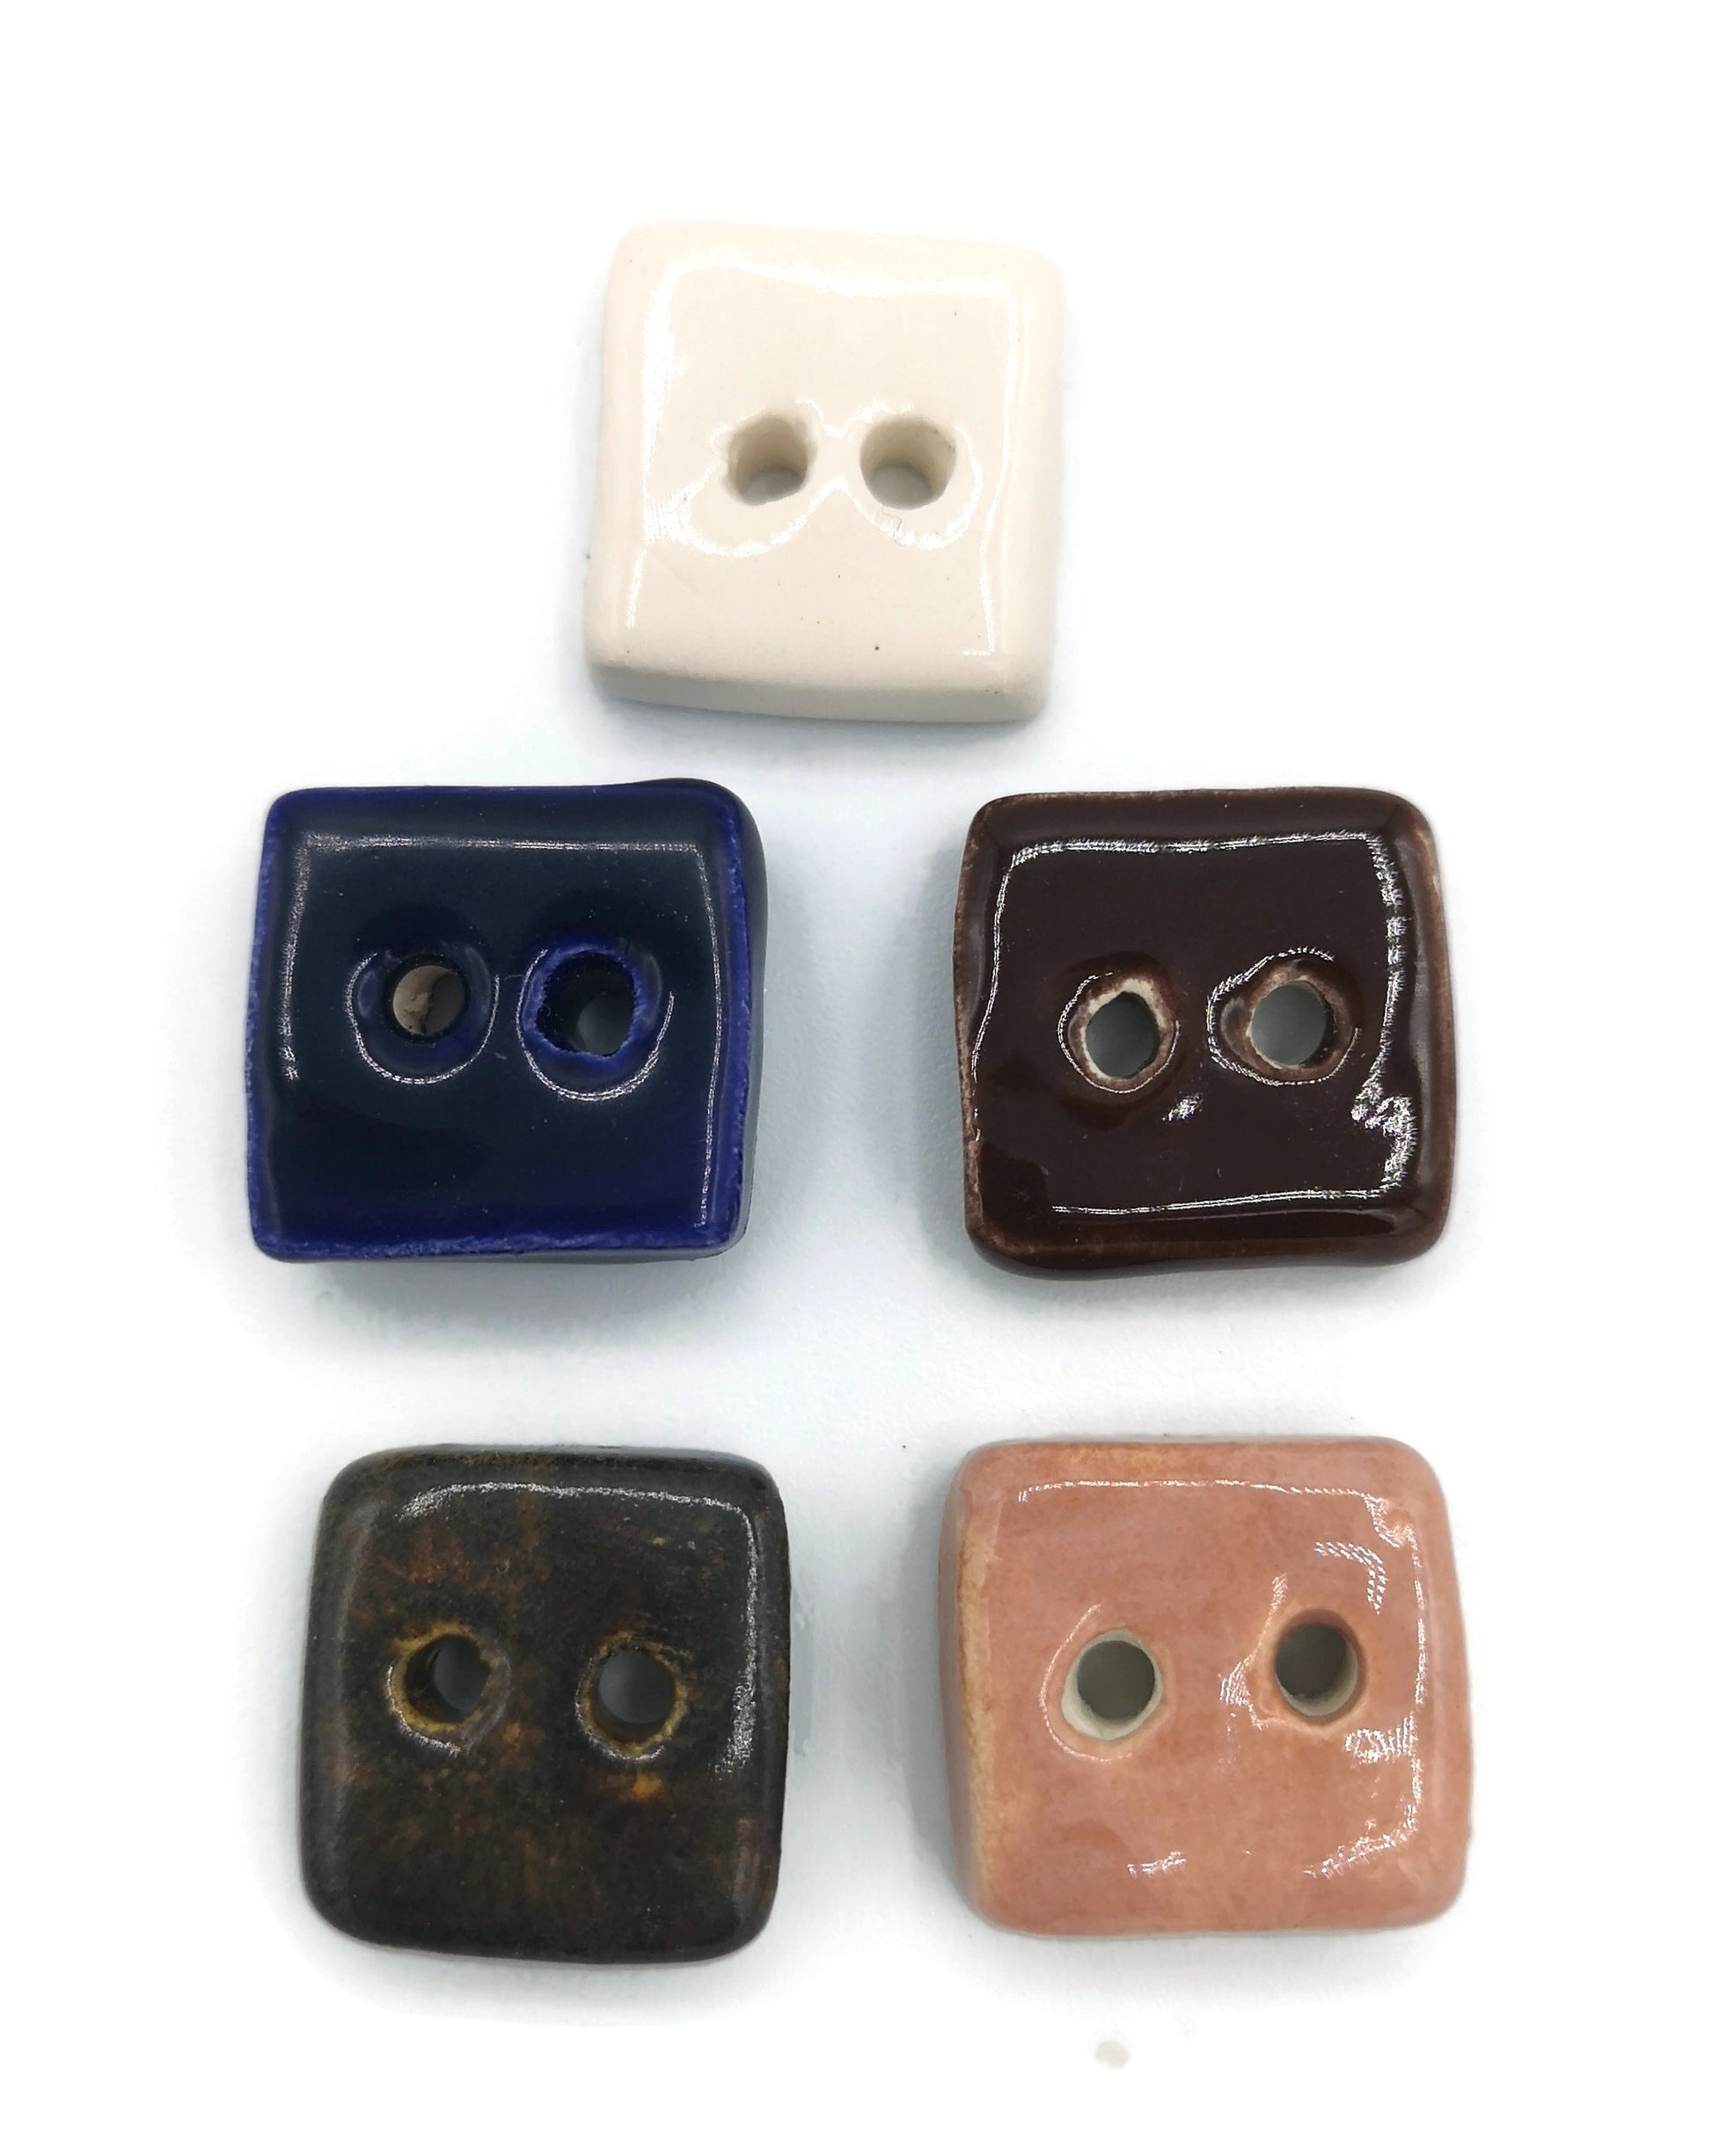 5Pc 20mm Handmade Ceramic Sewing Buttons For Clothing, Assorted Novelty Square Buttons For Crafts, Flat Back 2 Holes Coat Buttons - Ceramica Ana Rafael